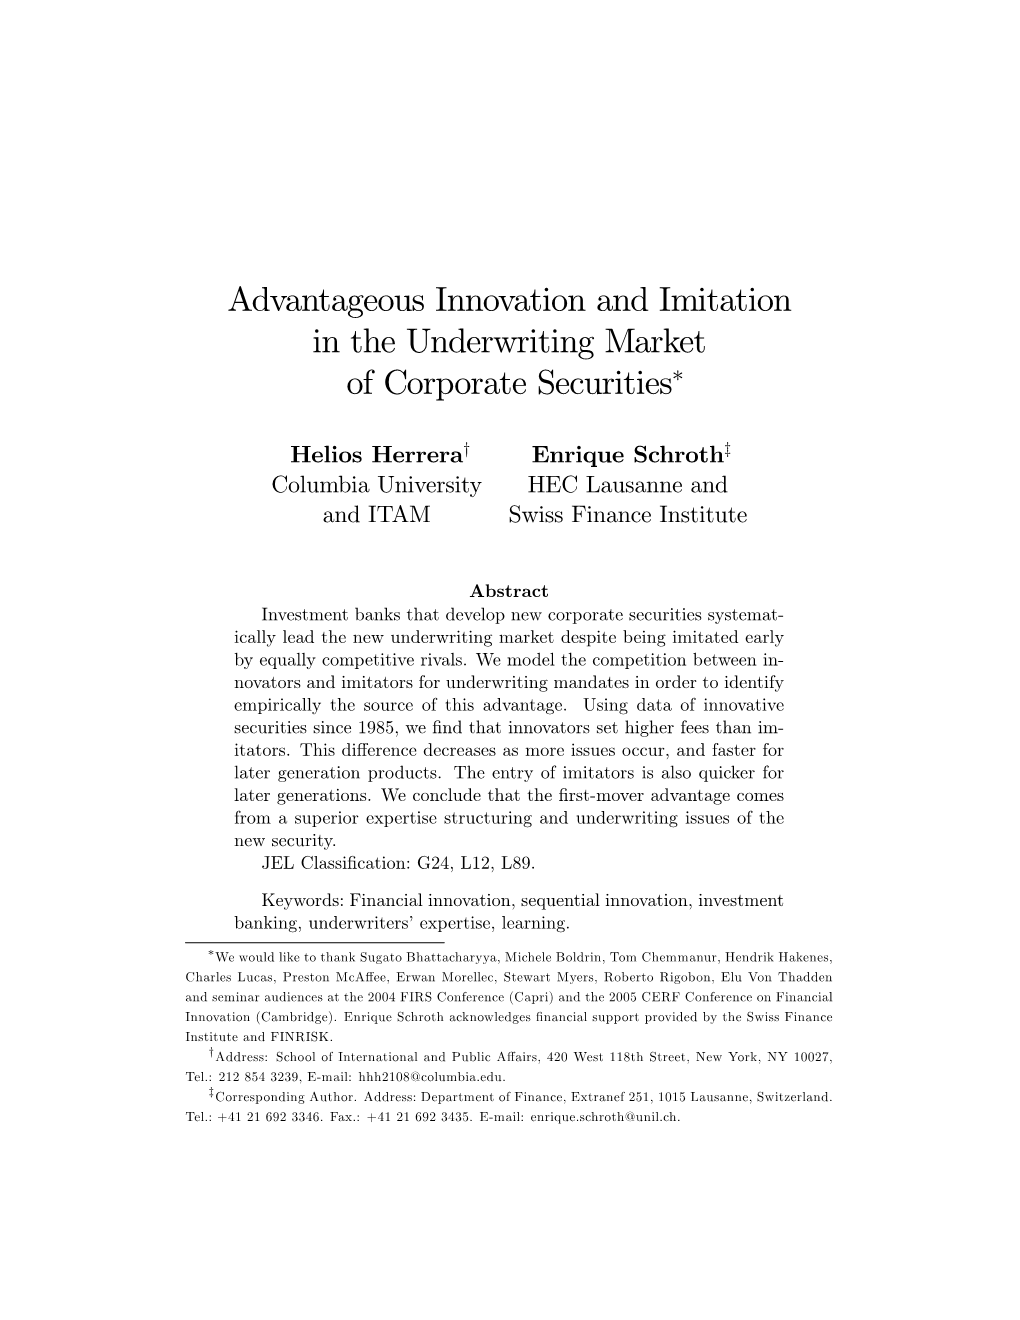 Advantageous Innovation and Imitation in the Underwriting Market of Corporate Securities